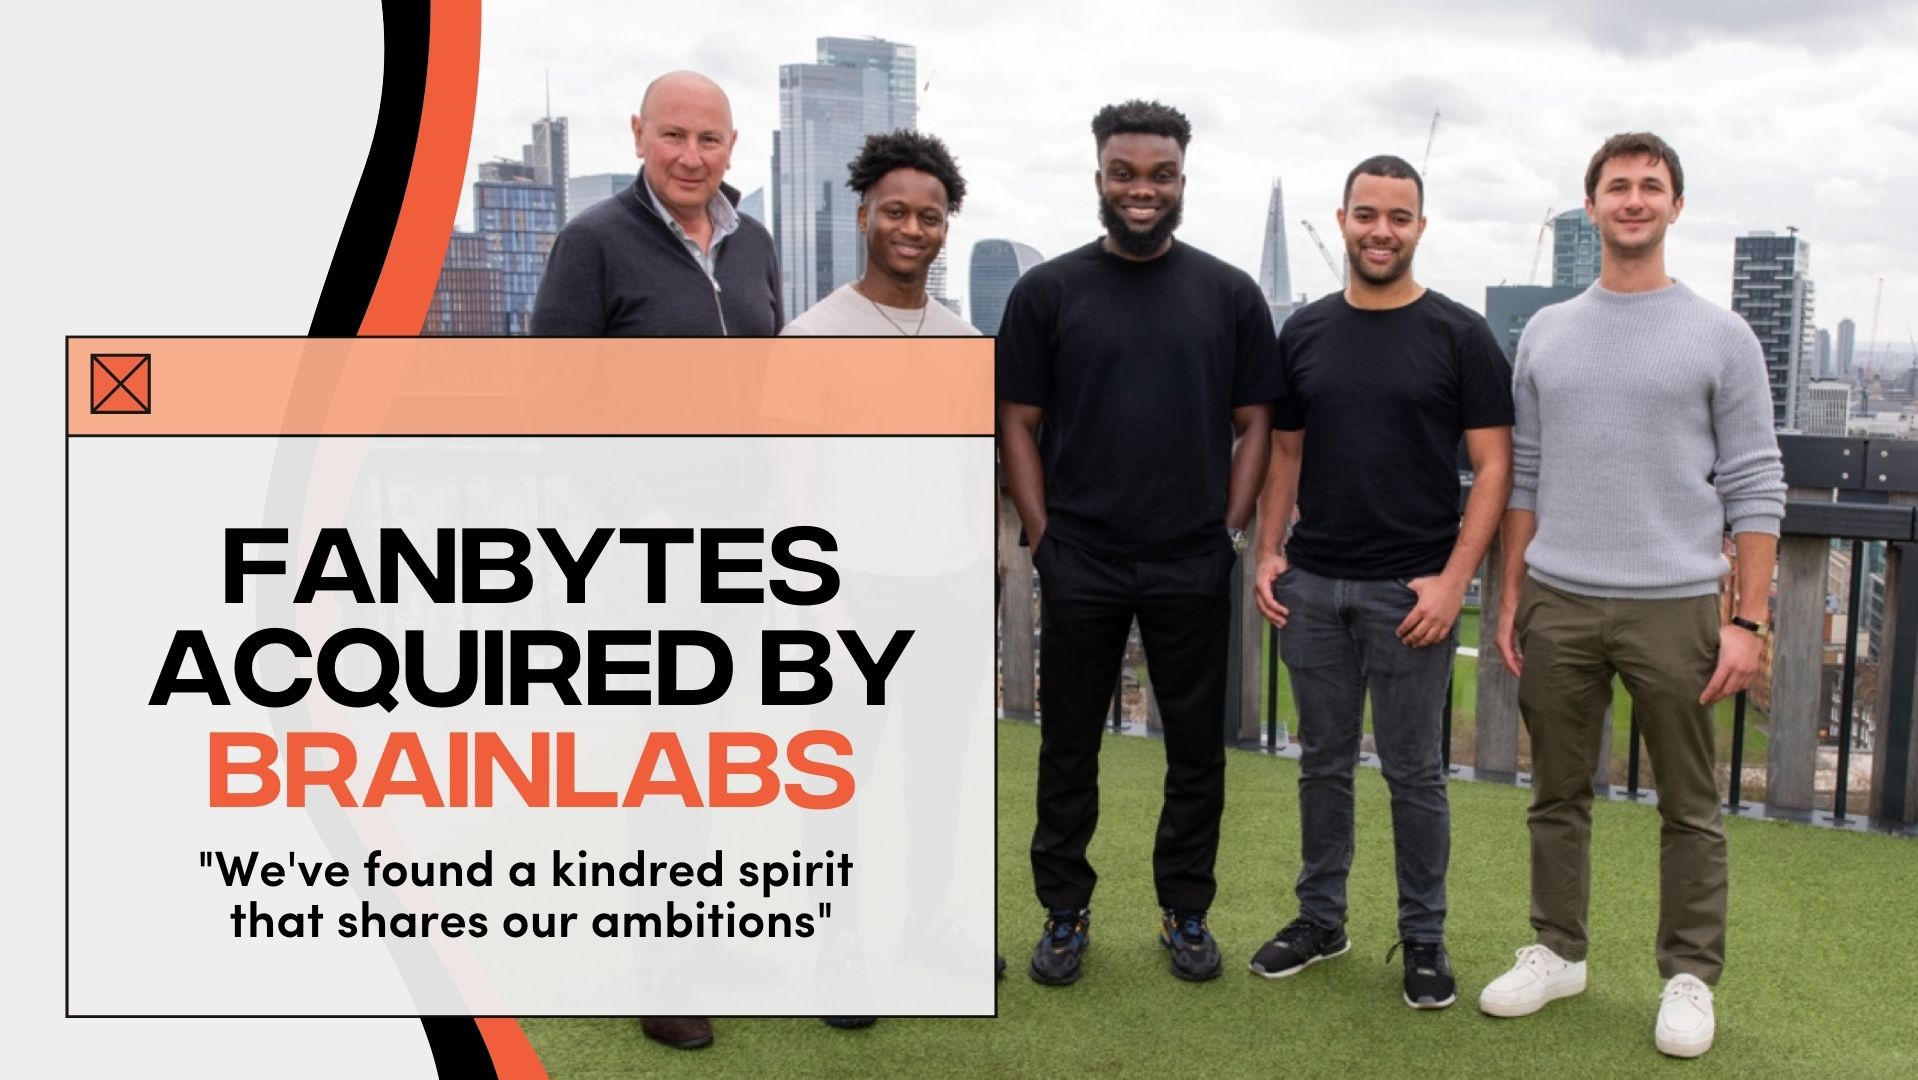 Fanbytes Brainlabs | Fanbytes acquired by Brainlabs